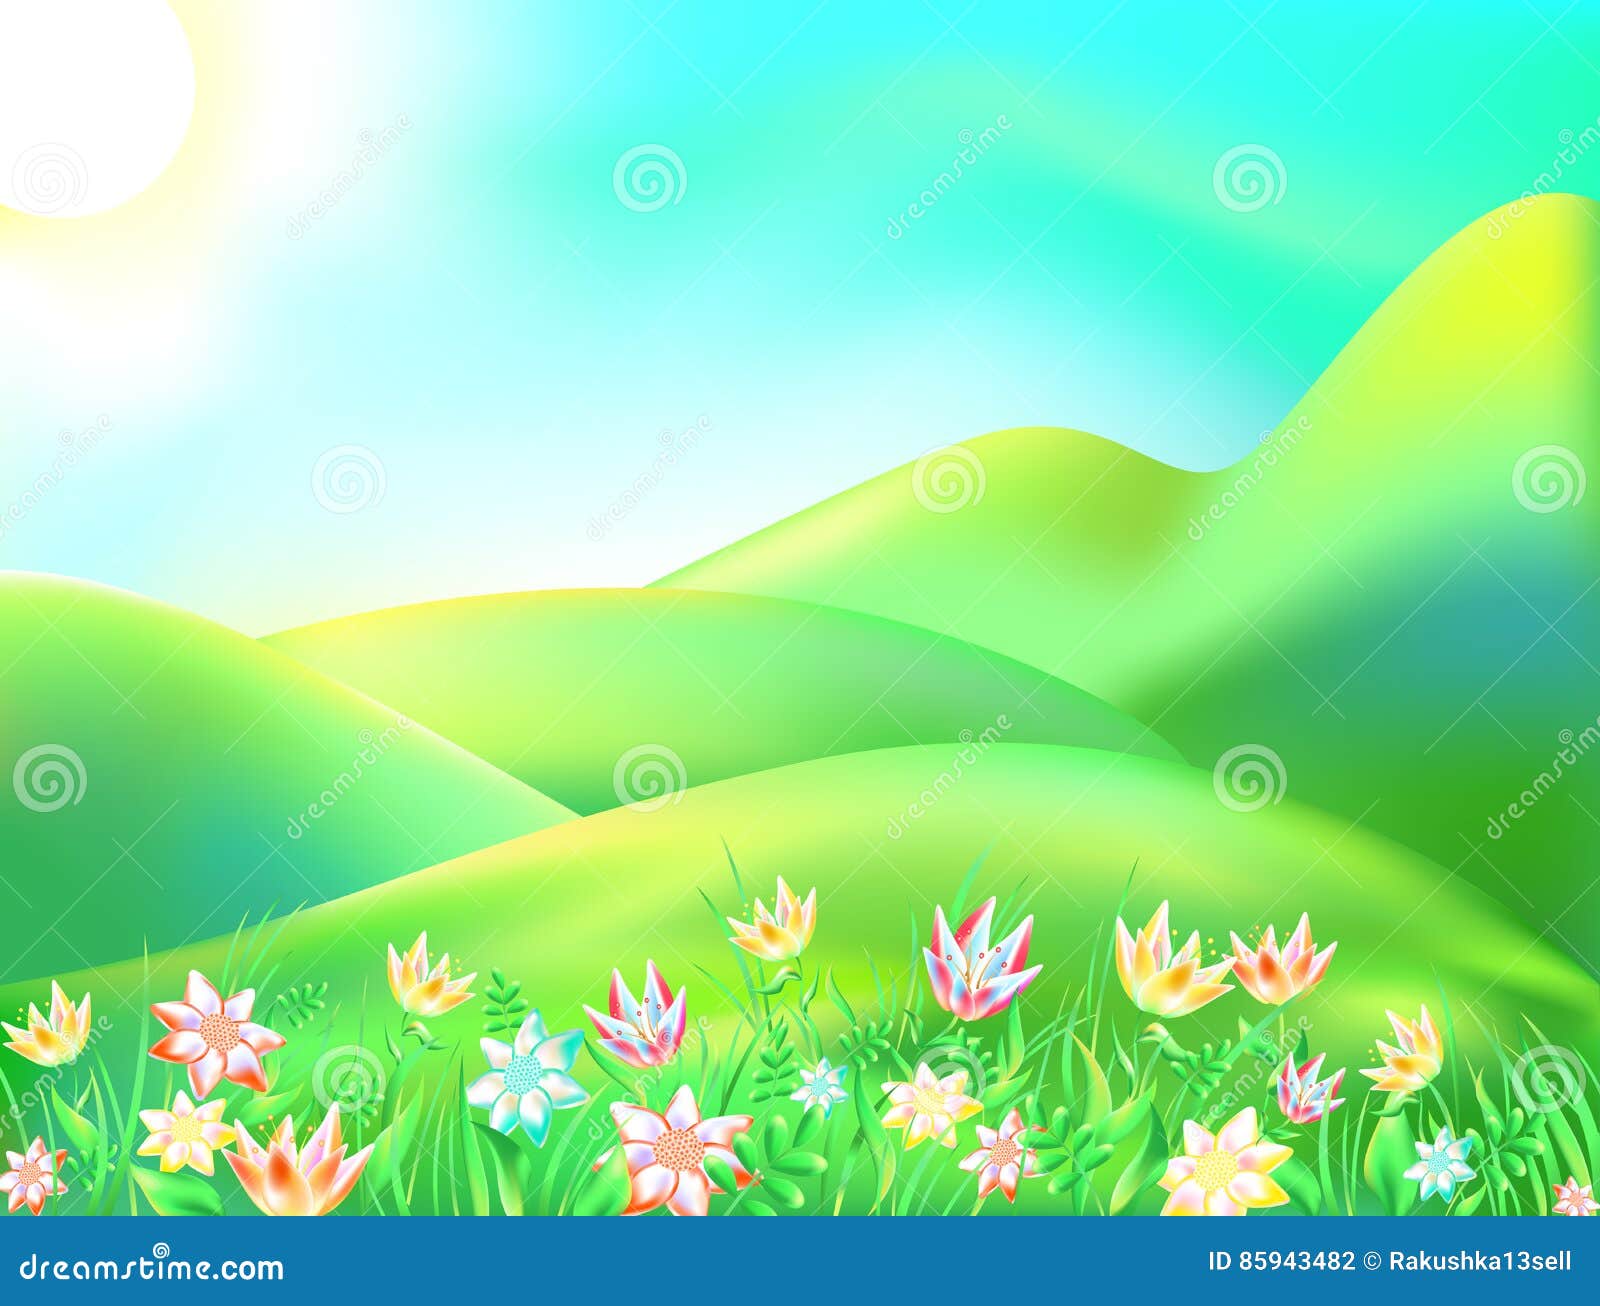 Vector Illustration of Colorful Nature. Cartoon Landscape of a Sunny Summer  Day Stock Vector - Illustration of background, bright: 85943482